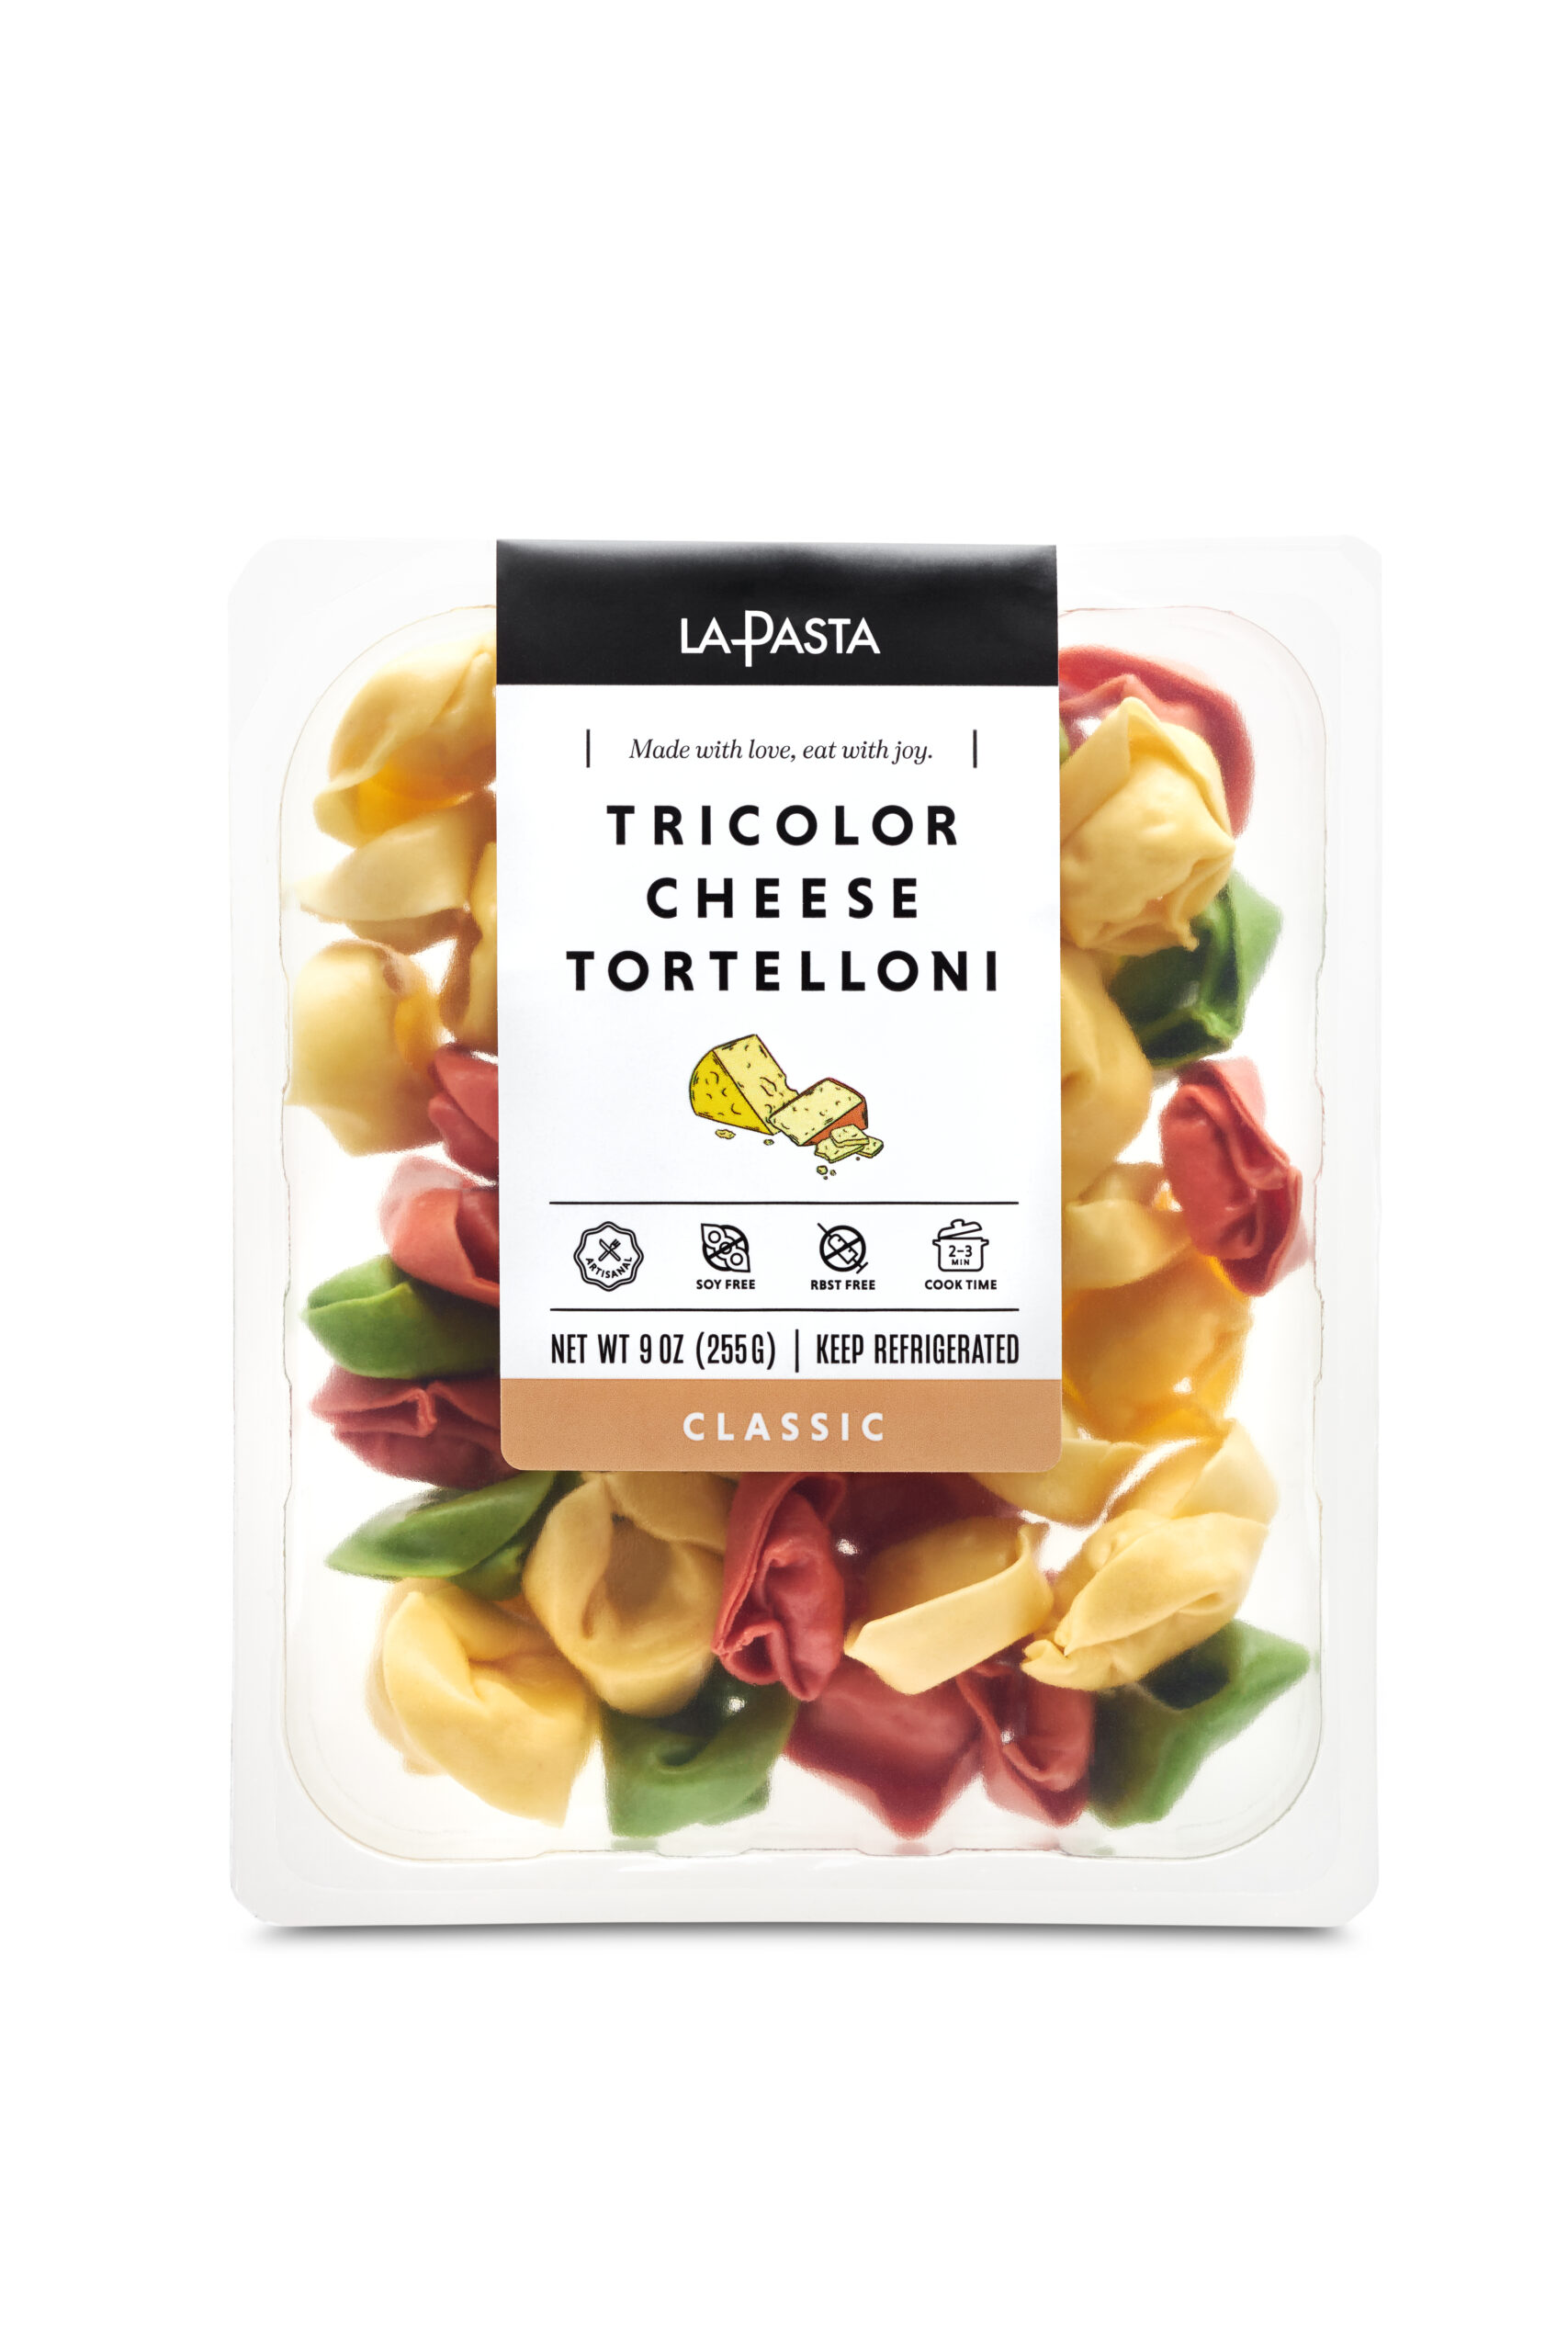 A package of tricolor cheese tortelloni